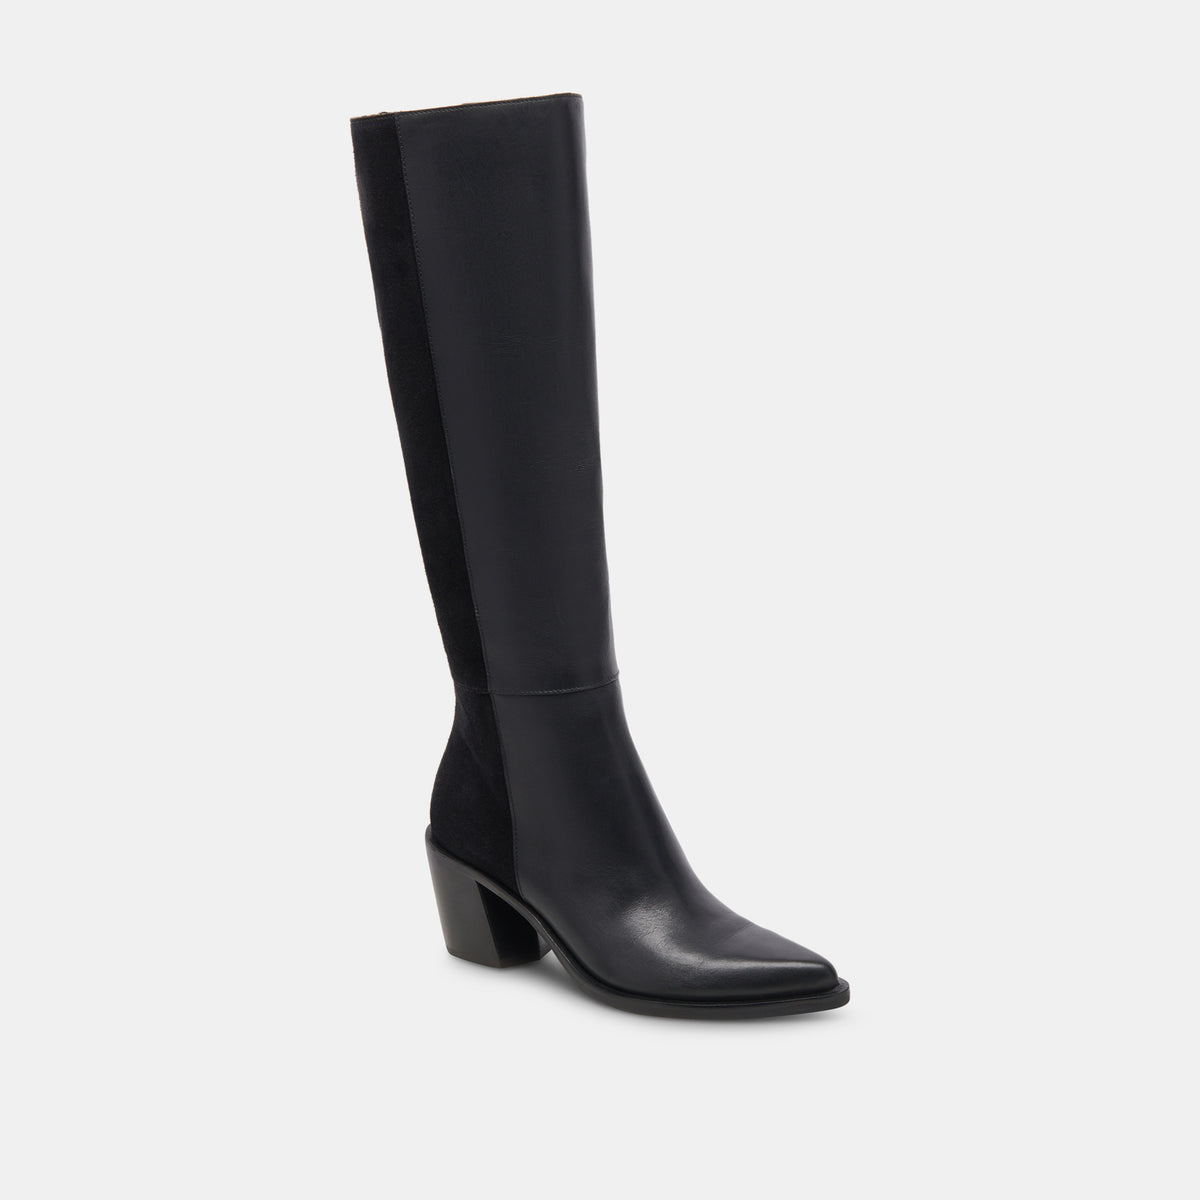 KRISTY Boots Black Leather | Women's Luxe Knee-High Black Boots – Dolce ...